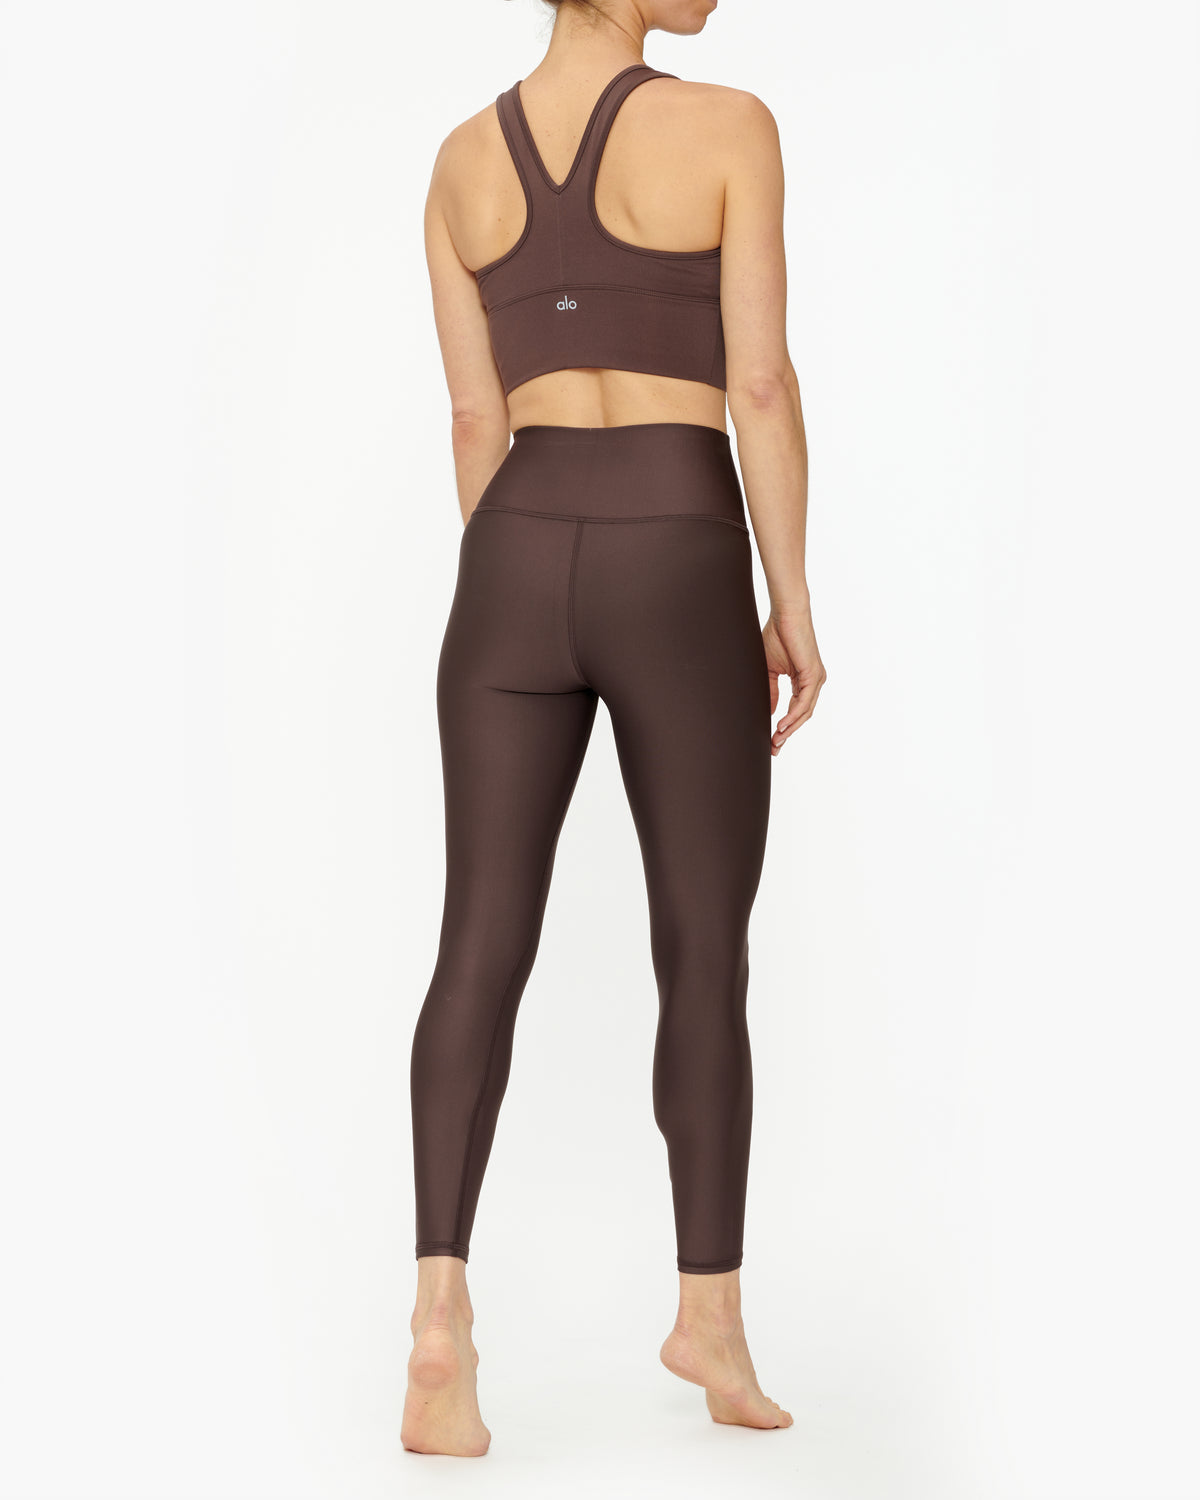 Shop ALO Yoga Activewear Tops by TreeHugger